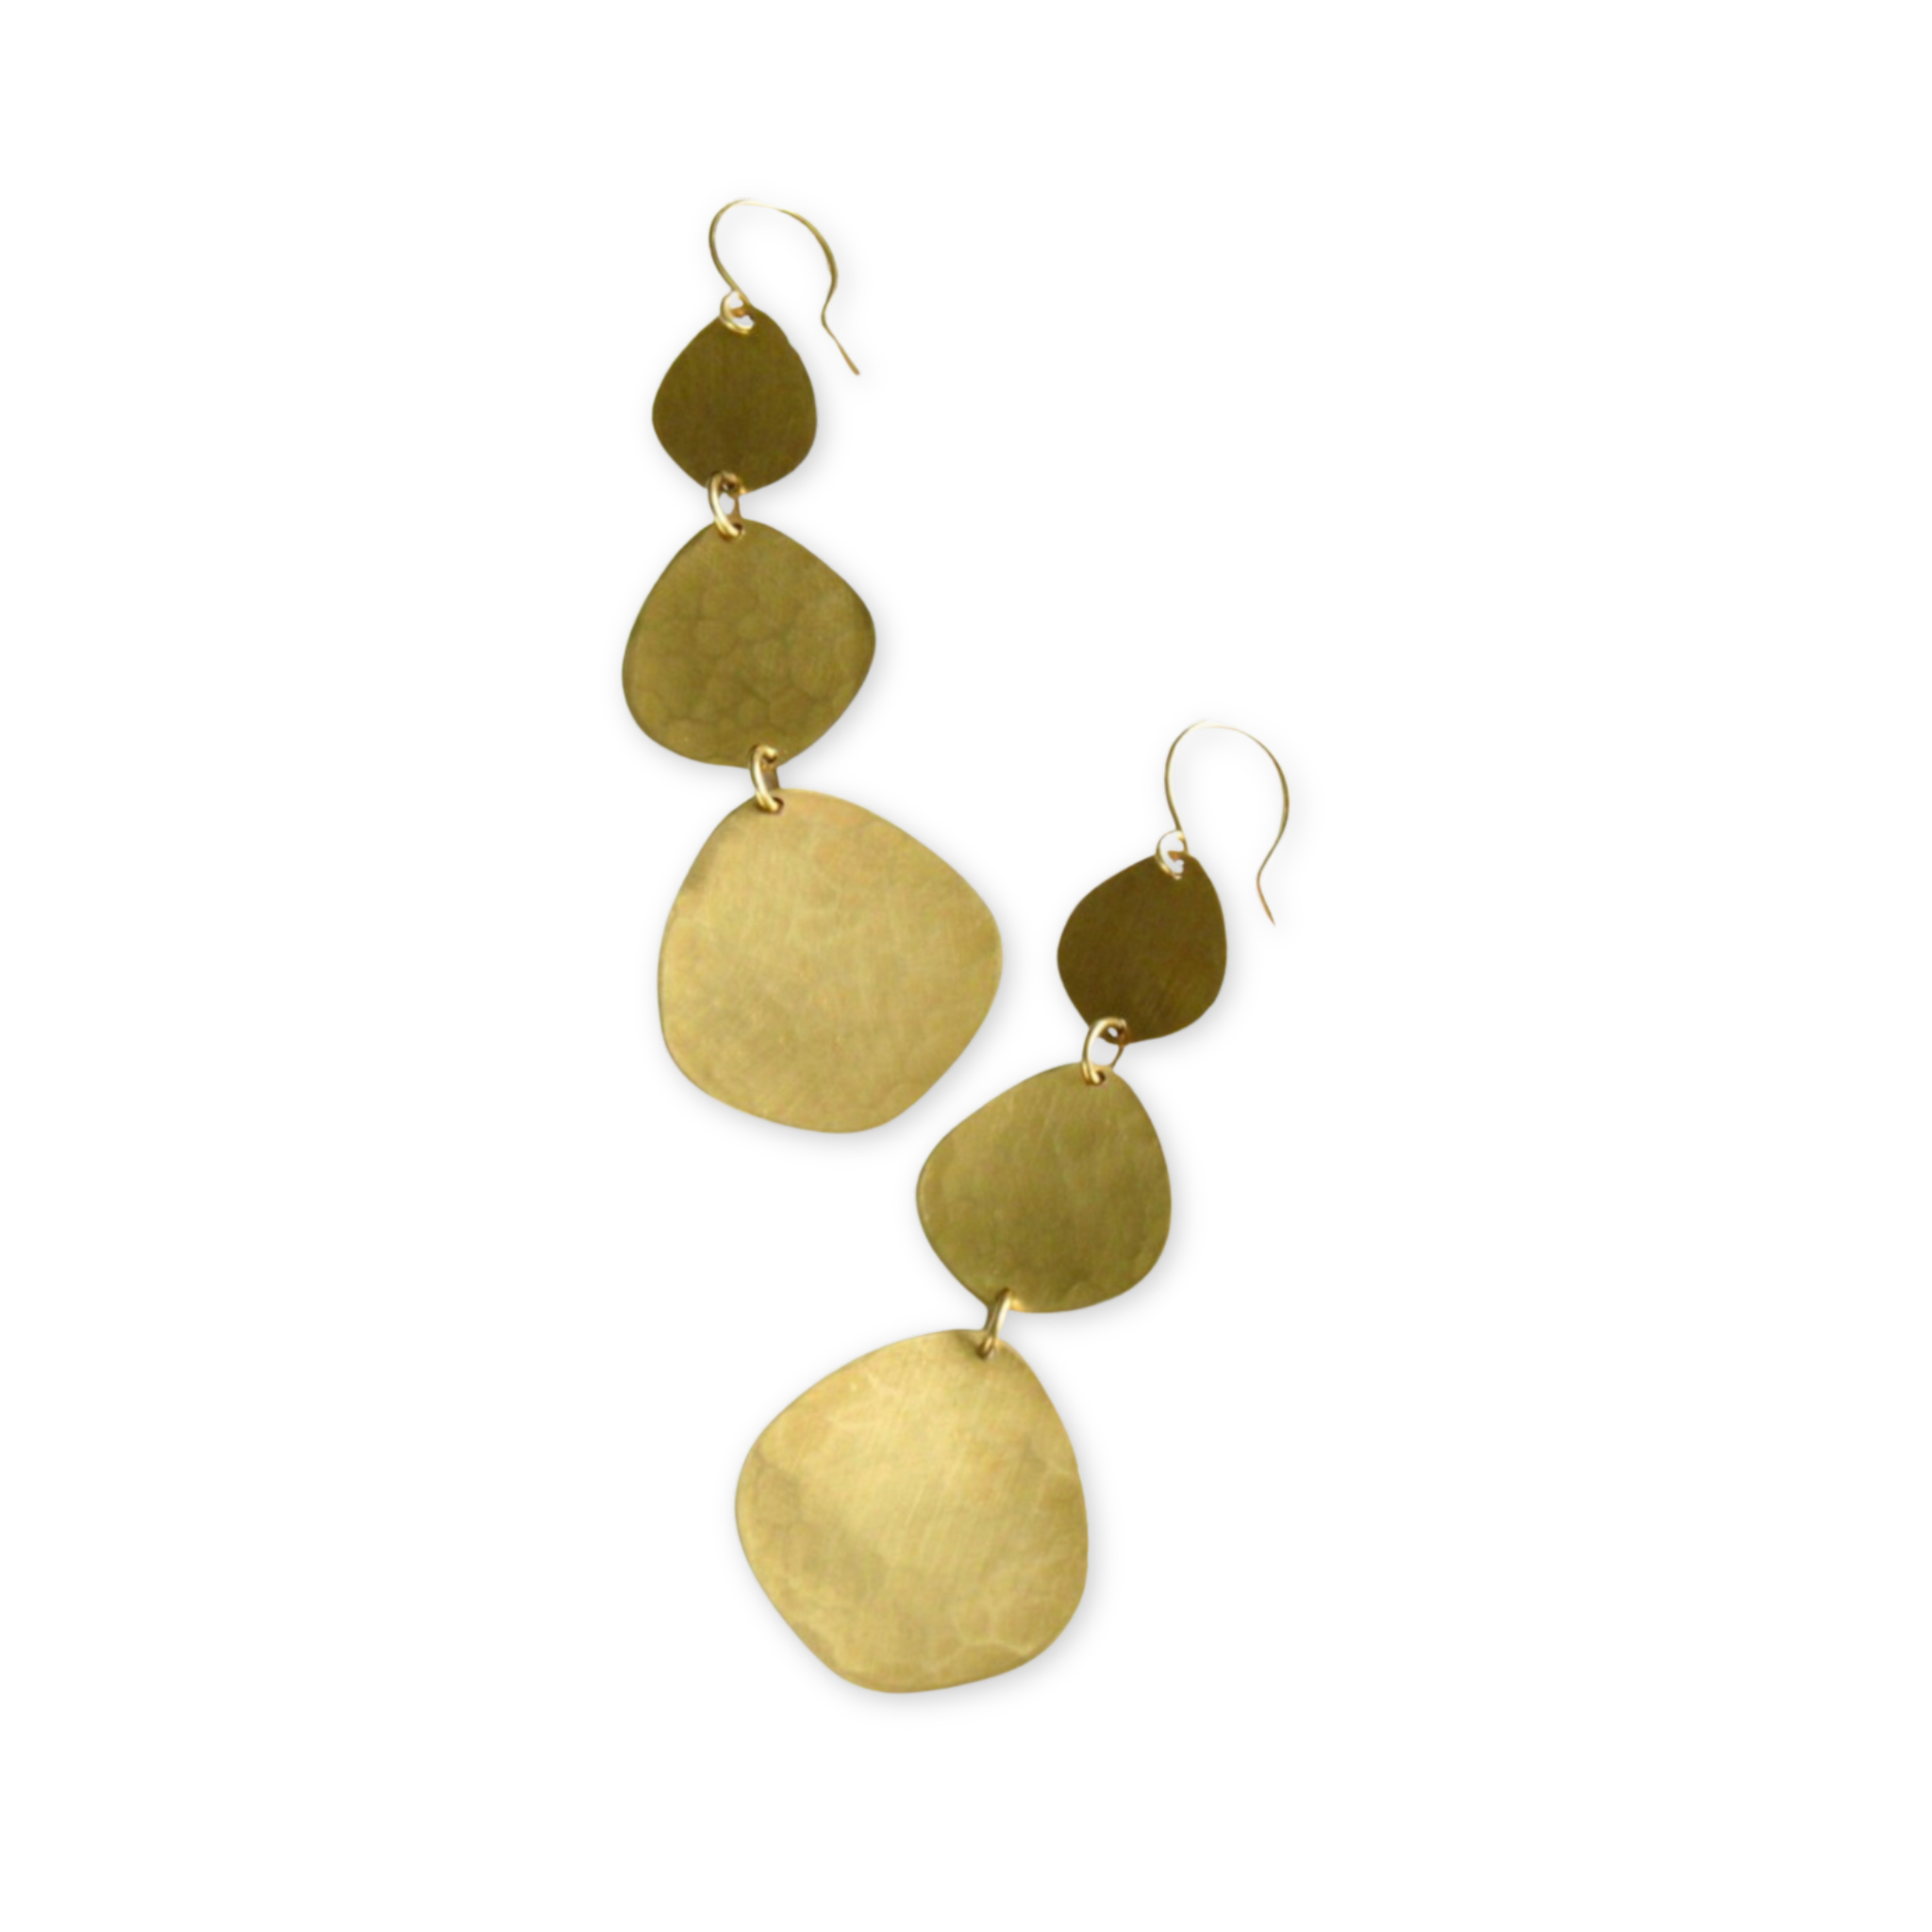 gold earrings with 3 organic shaped discs